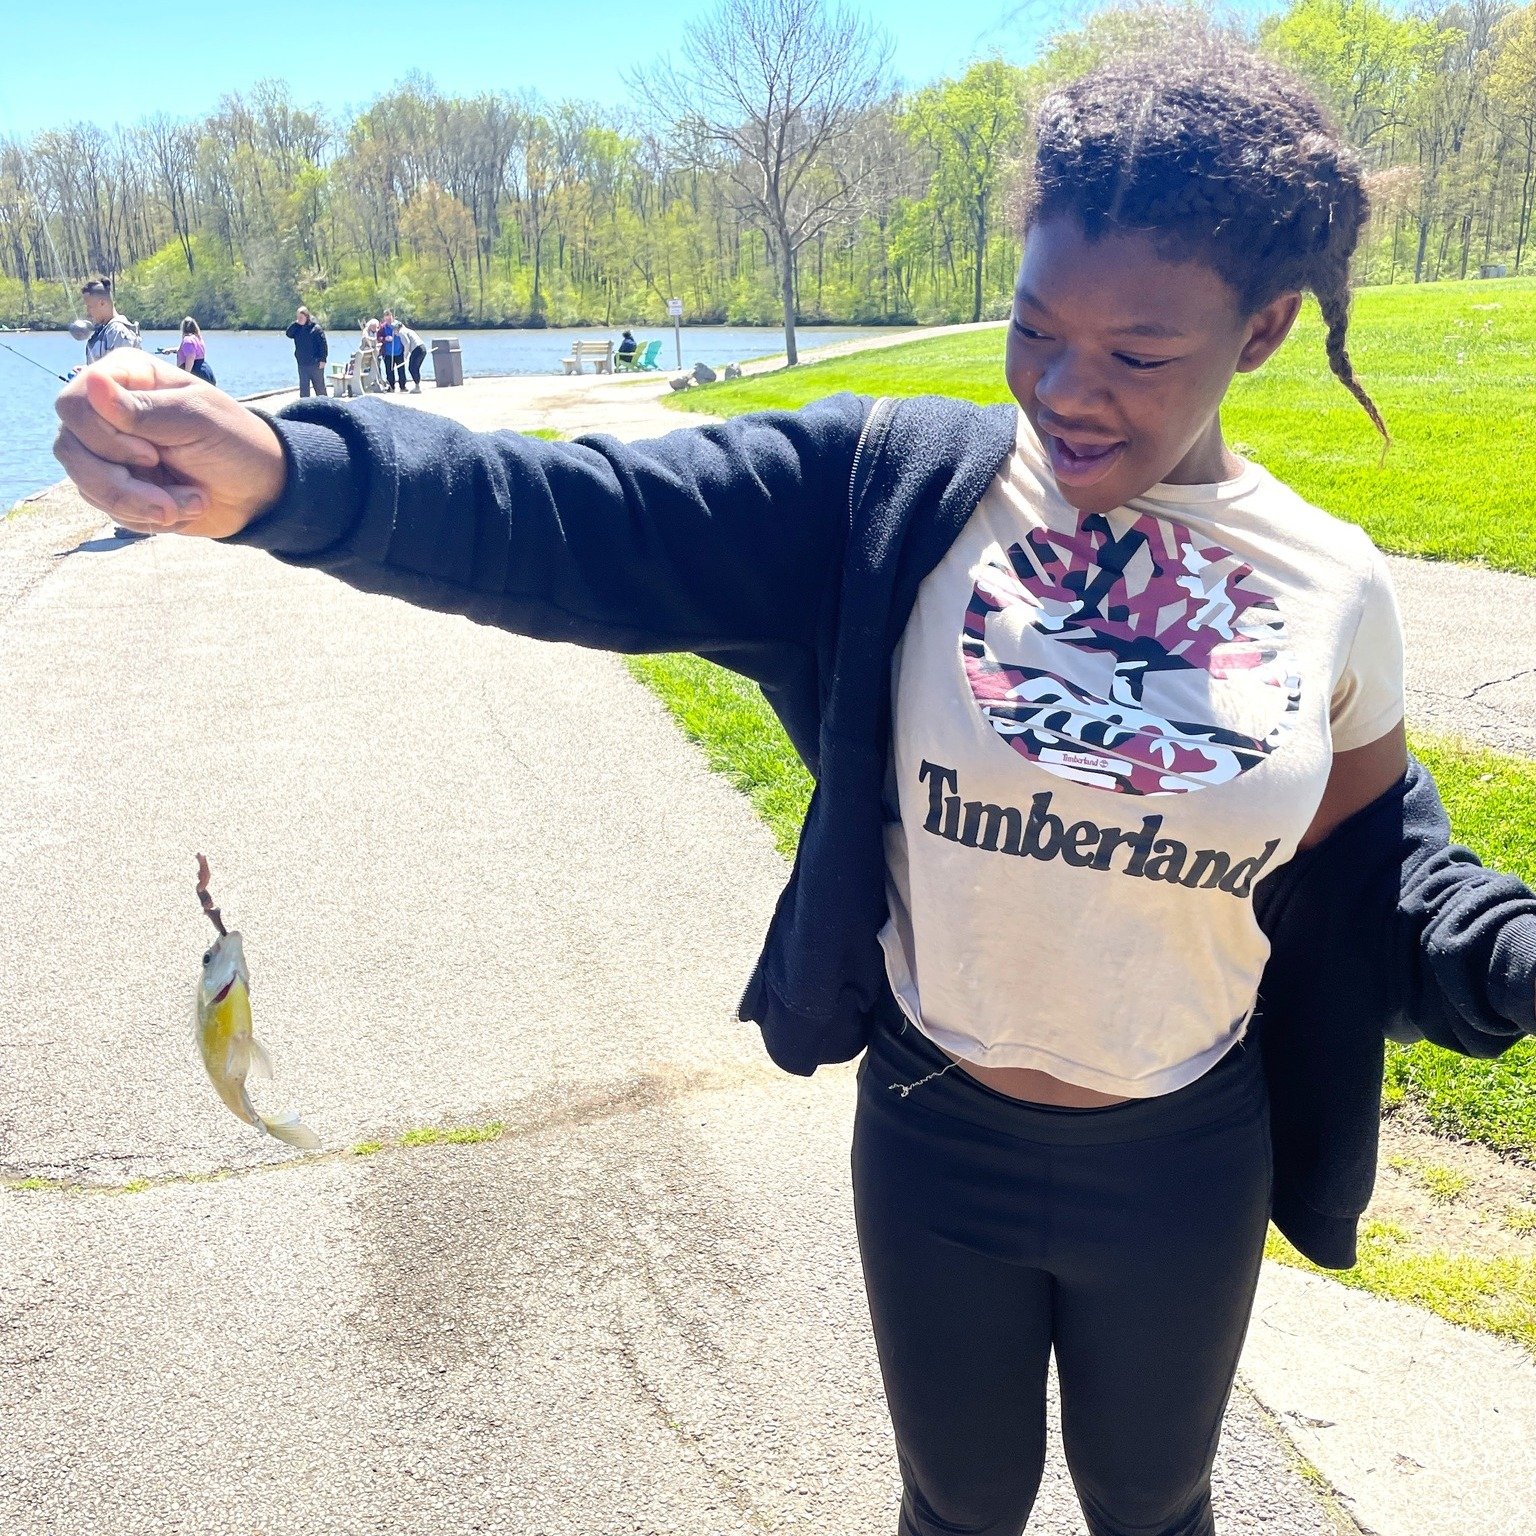 Exploring with wonderful people.
😄🌳
We had another great park day at Miami Whitewater this past Saturday! During these April adventures, teens get to choose from activities such as fishing; hiking and exploring nature; field games; tackling the fit